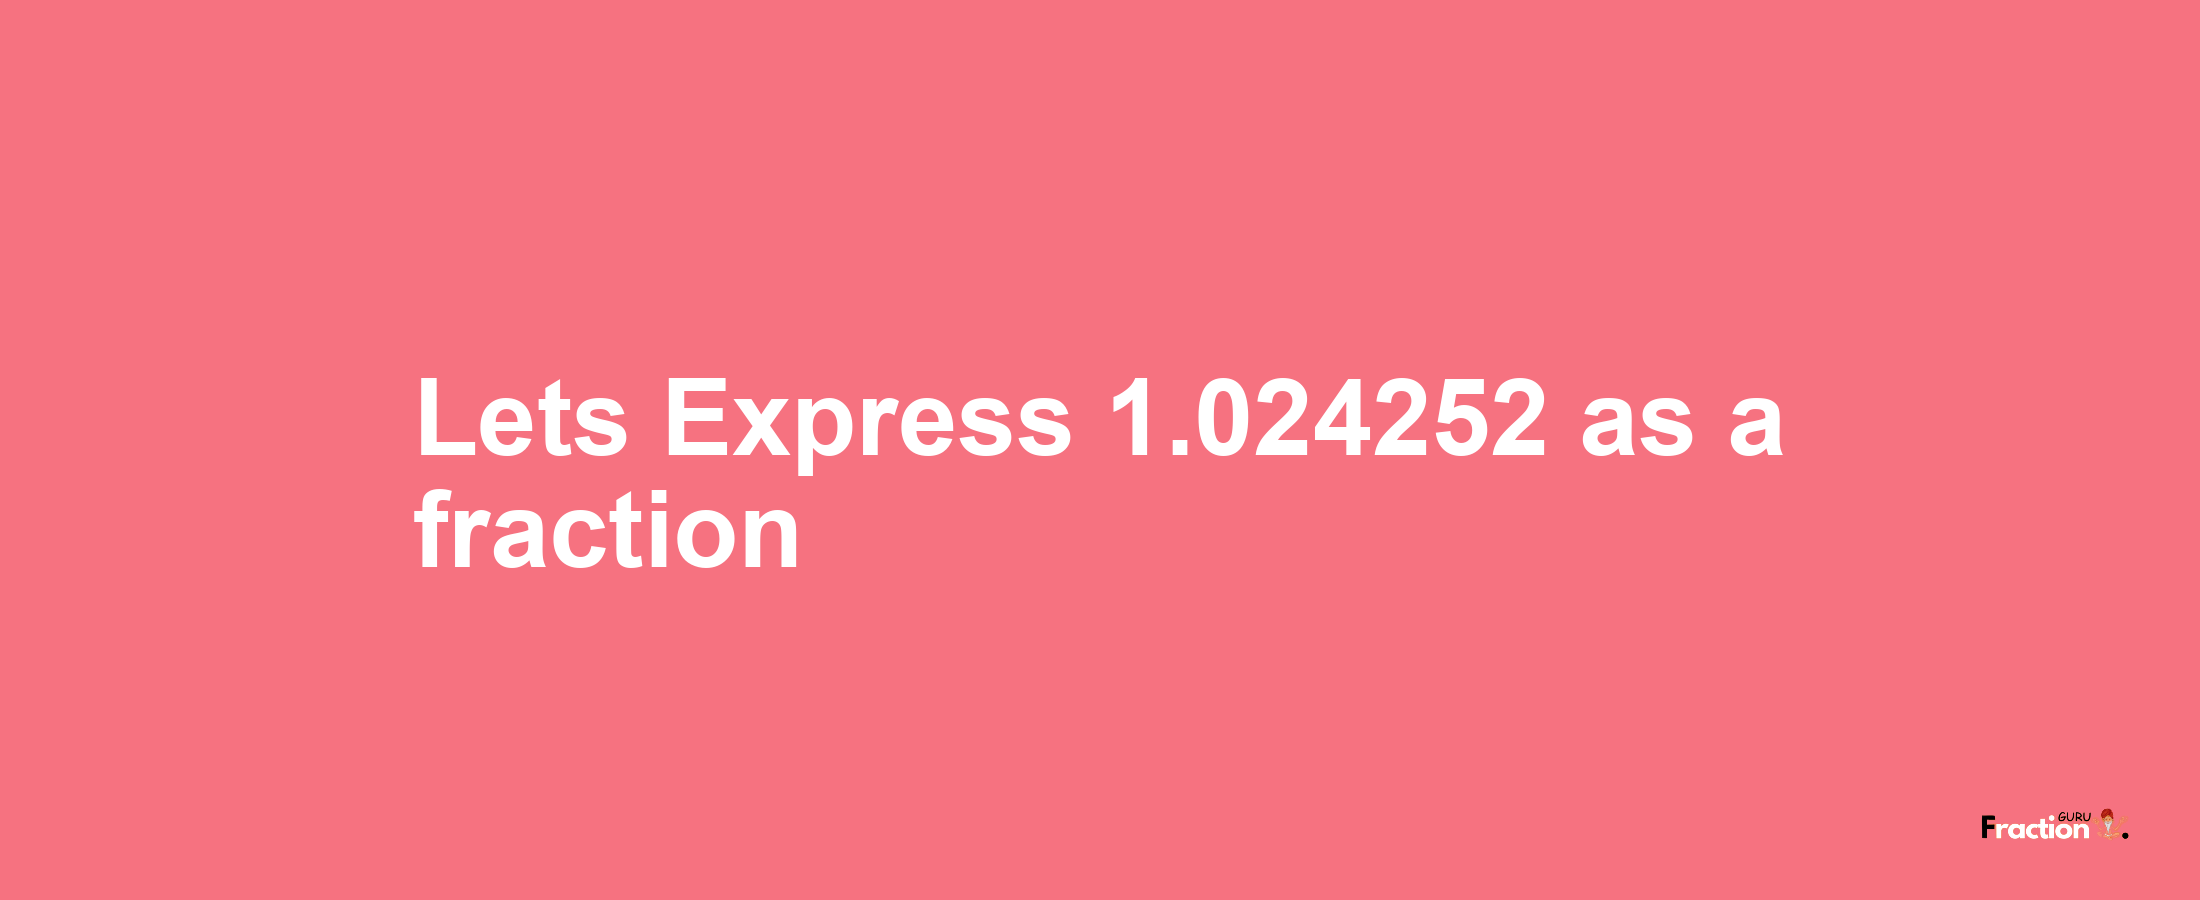 Lets Express 1.024252 as afraction